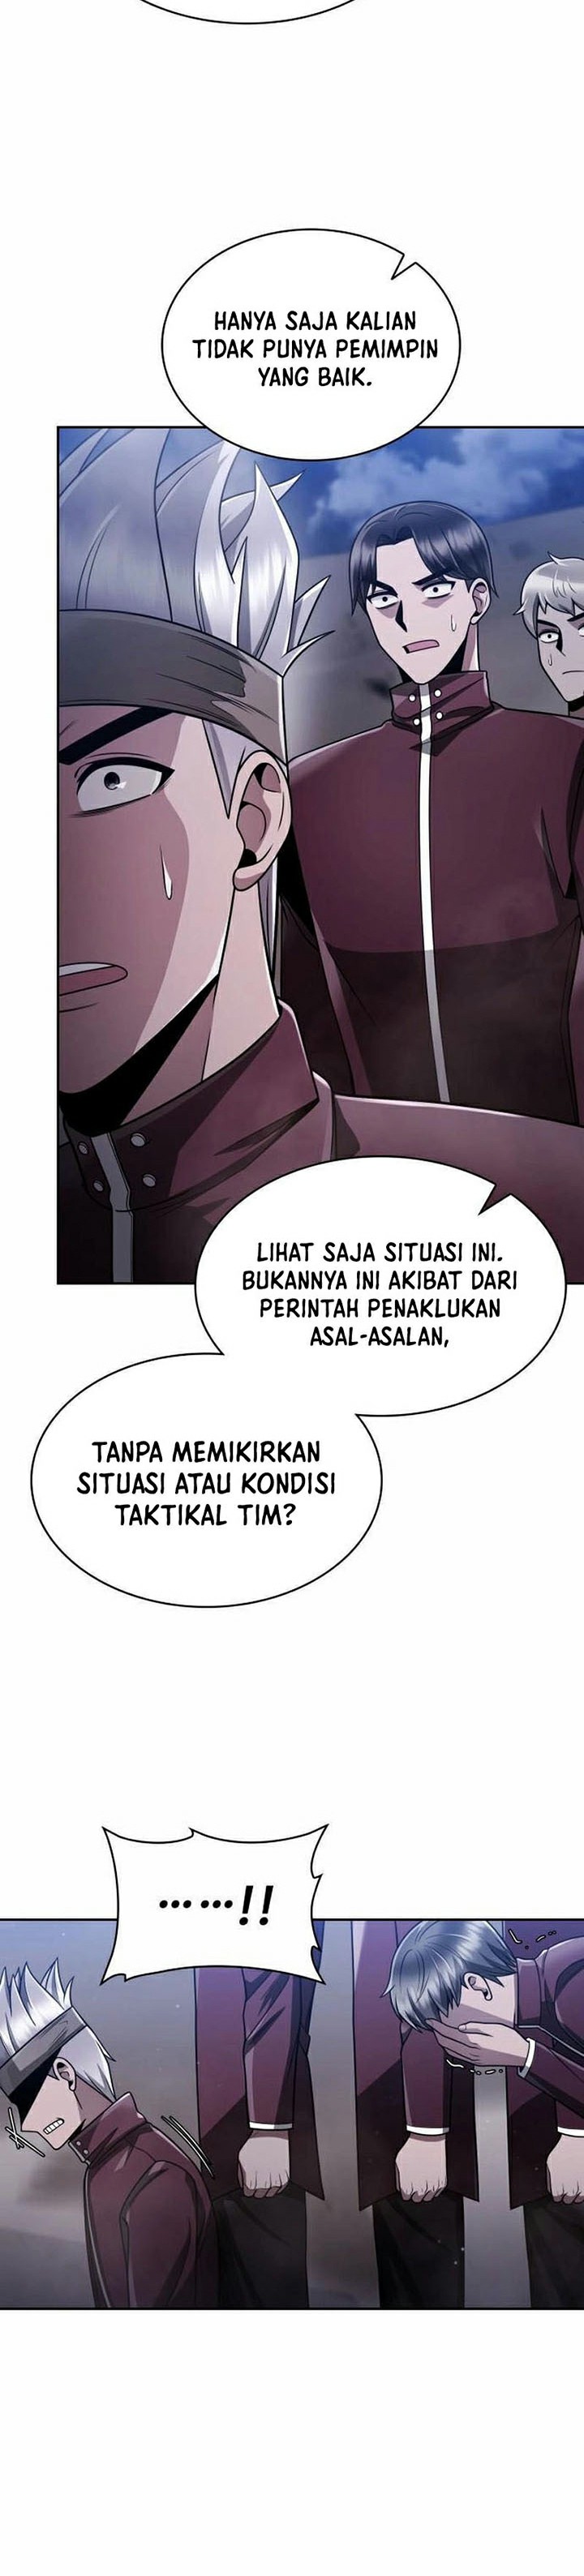 Dilarang COPAS - situs resmi www.mangacanblog.com - Komik clever cleaning life of the returned genius hunter 060 - chapter 60 61 Indonesia clever cleaning life of the returned genius hunter 060 - chapter 60 Terbaru 24|Baca Manga Komik Indonesia|Mangacan